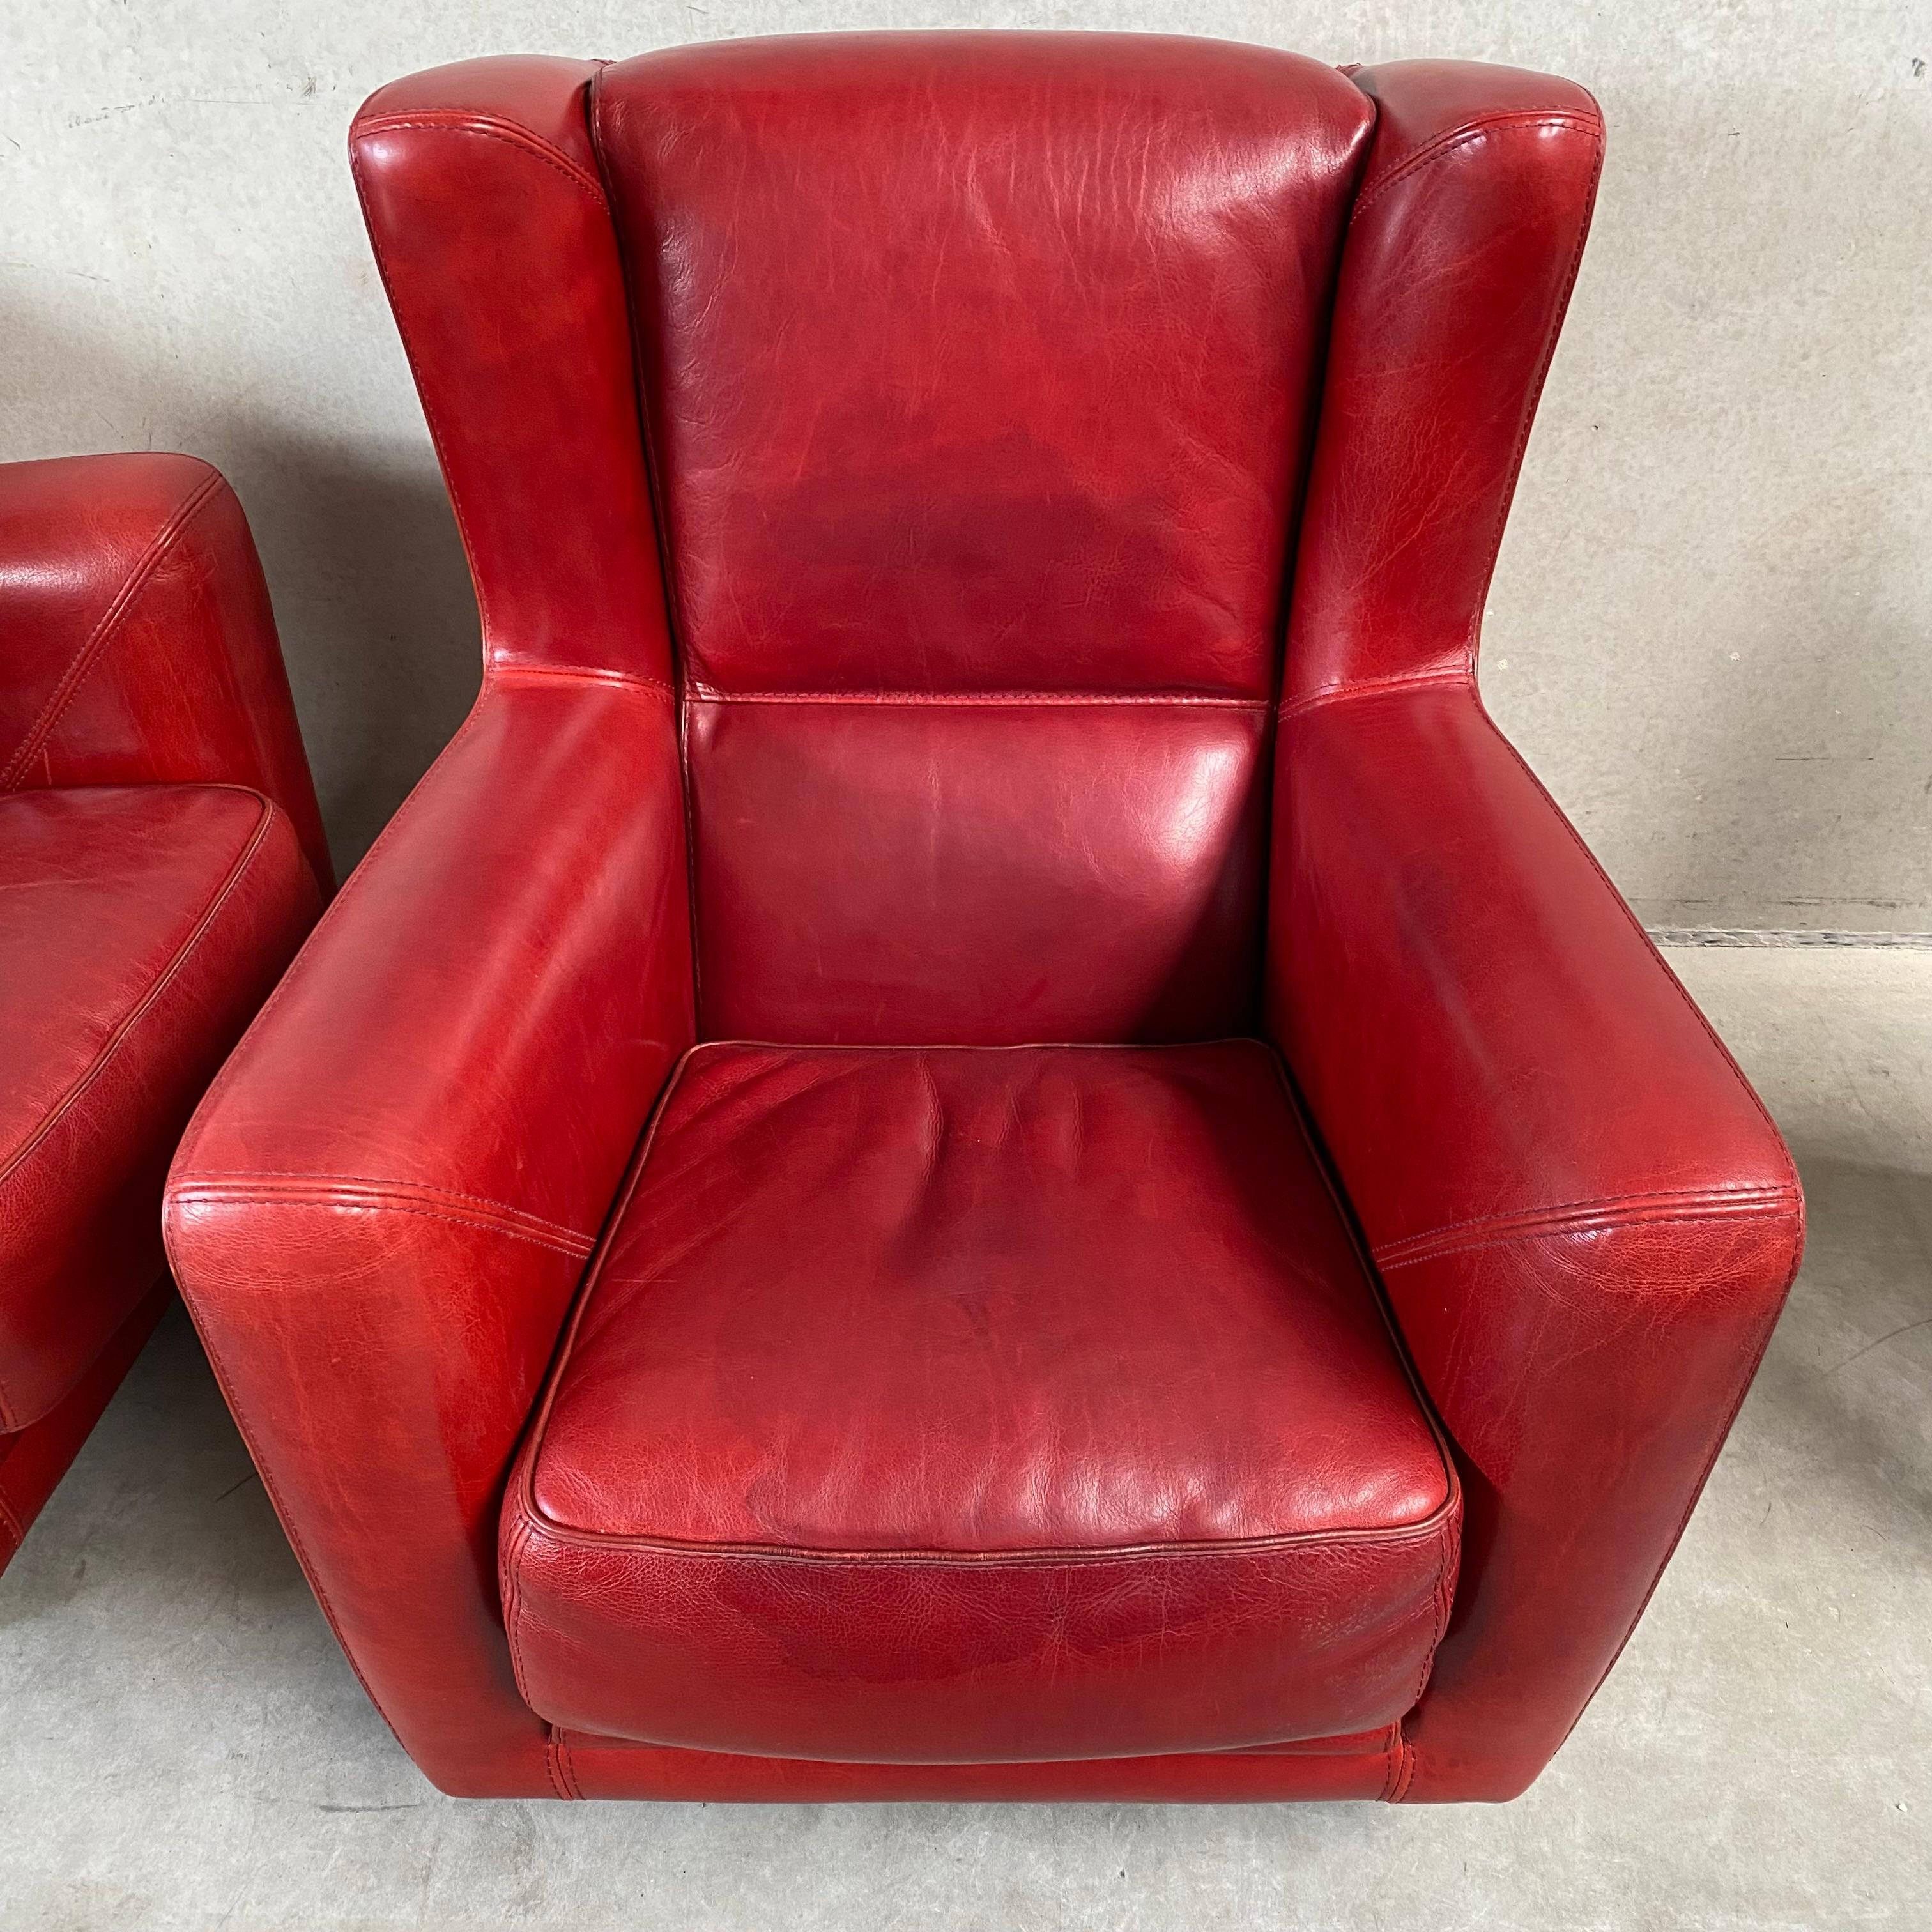 Late 20th Century Pair of Ox-Blood Red Leather Lounge Chairs Begére by Baxter Italy 90s For Sale